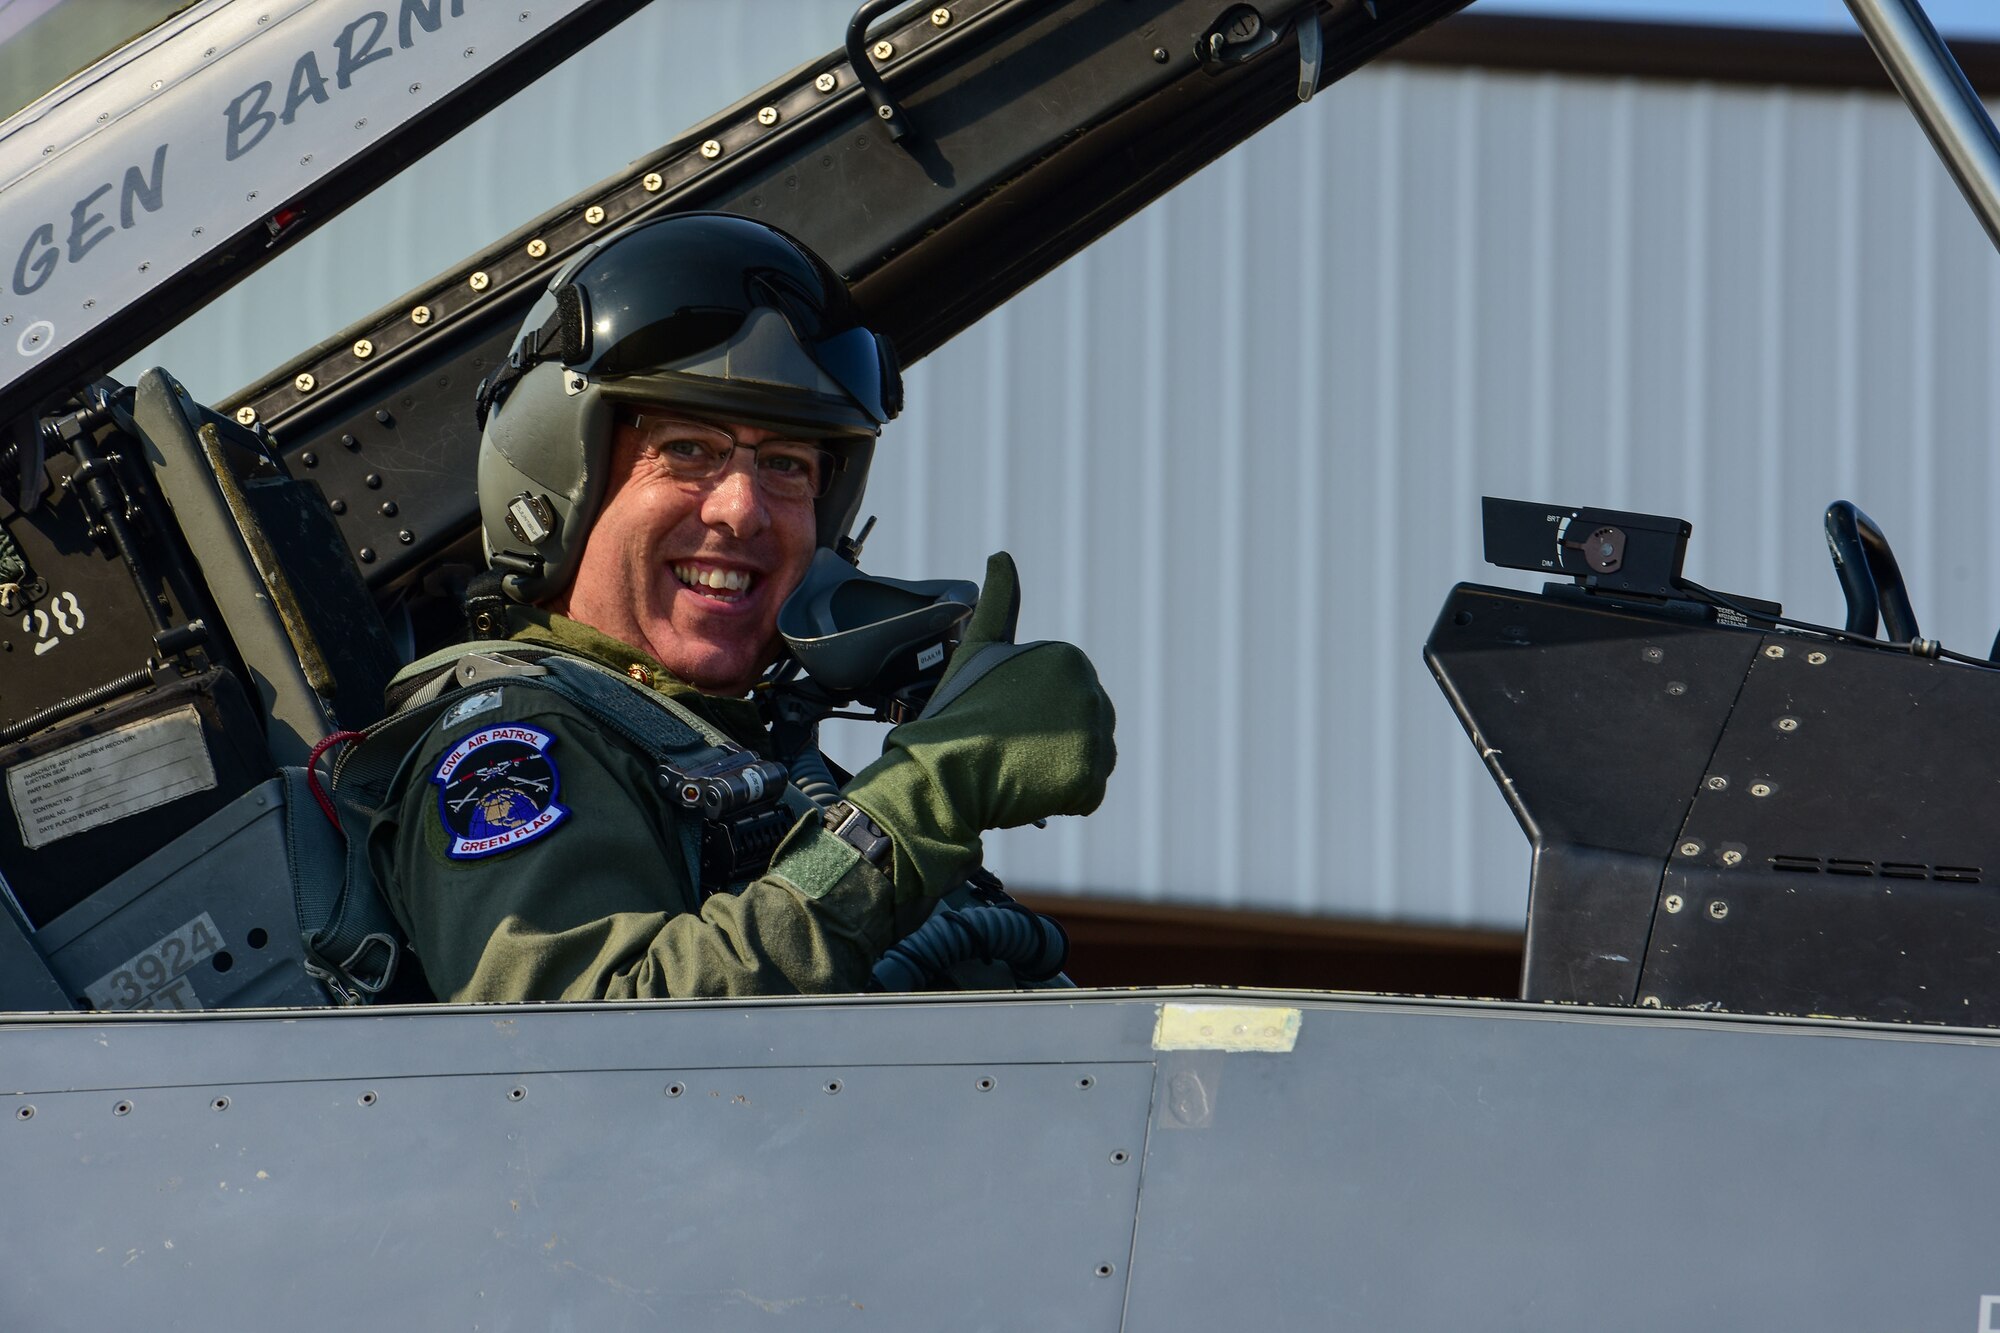 U.S. Civil Air Patrol Lt. Col. Brett Grooms, the legislative commander of the Civil Air Patrol's South Carolina Wing, gives a thumbs up prior to an aerospace control alert familiarization flight in an F-16 Fighting Falcon fighter jet from the South Carolina Air National Guard June 11. The 169th FW, in close coordination with the Continental U.S. North American Aerospace Defense Command Region, the Eastern Air Defense Sector and the Federal Aviation Administration had recently hosted a Southeast Aerospace Control Alert June 5-7, but weather delays precluded Grooms from flying during the actual SACA event. The conference was a total team training initiative to improve homeland defense capabilities by developing techniques with joint forces during small-scale exercises. This conference consisted of SCANG 169FW F-16 fighter jets, U.S. Coast Guard Rotary Wing Air Intercept Squadron MH-65D Dolphin helicopters from USCG Air Station Atlantic City and South Carolina Wing Civil Air Patrol aircraft and crews to hone their skills with tactical-level air-intercept procedures. (U.S. Air National Guard photo by Senior Airman Megan Floyd)